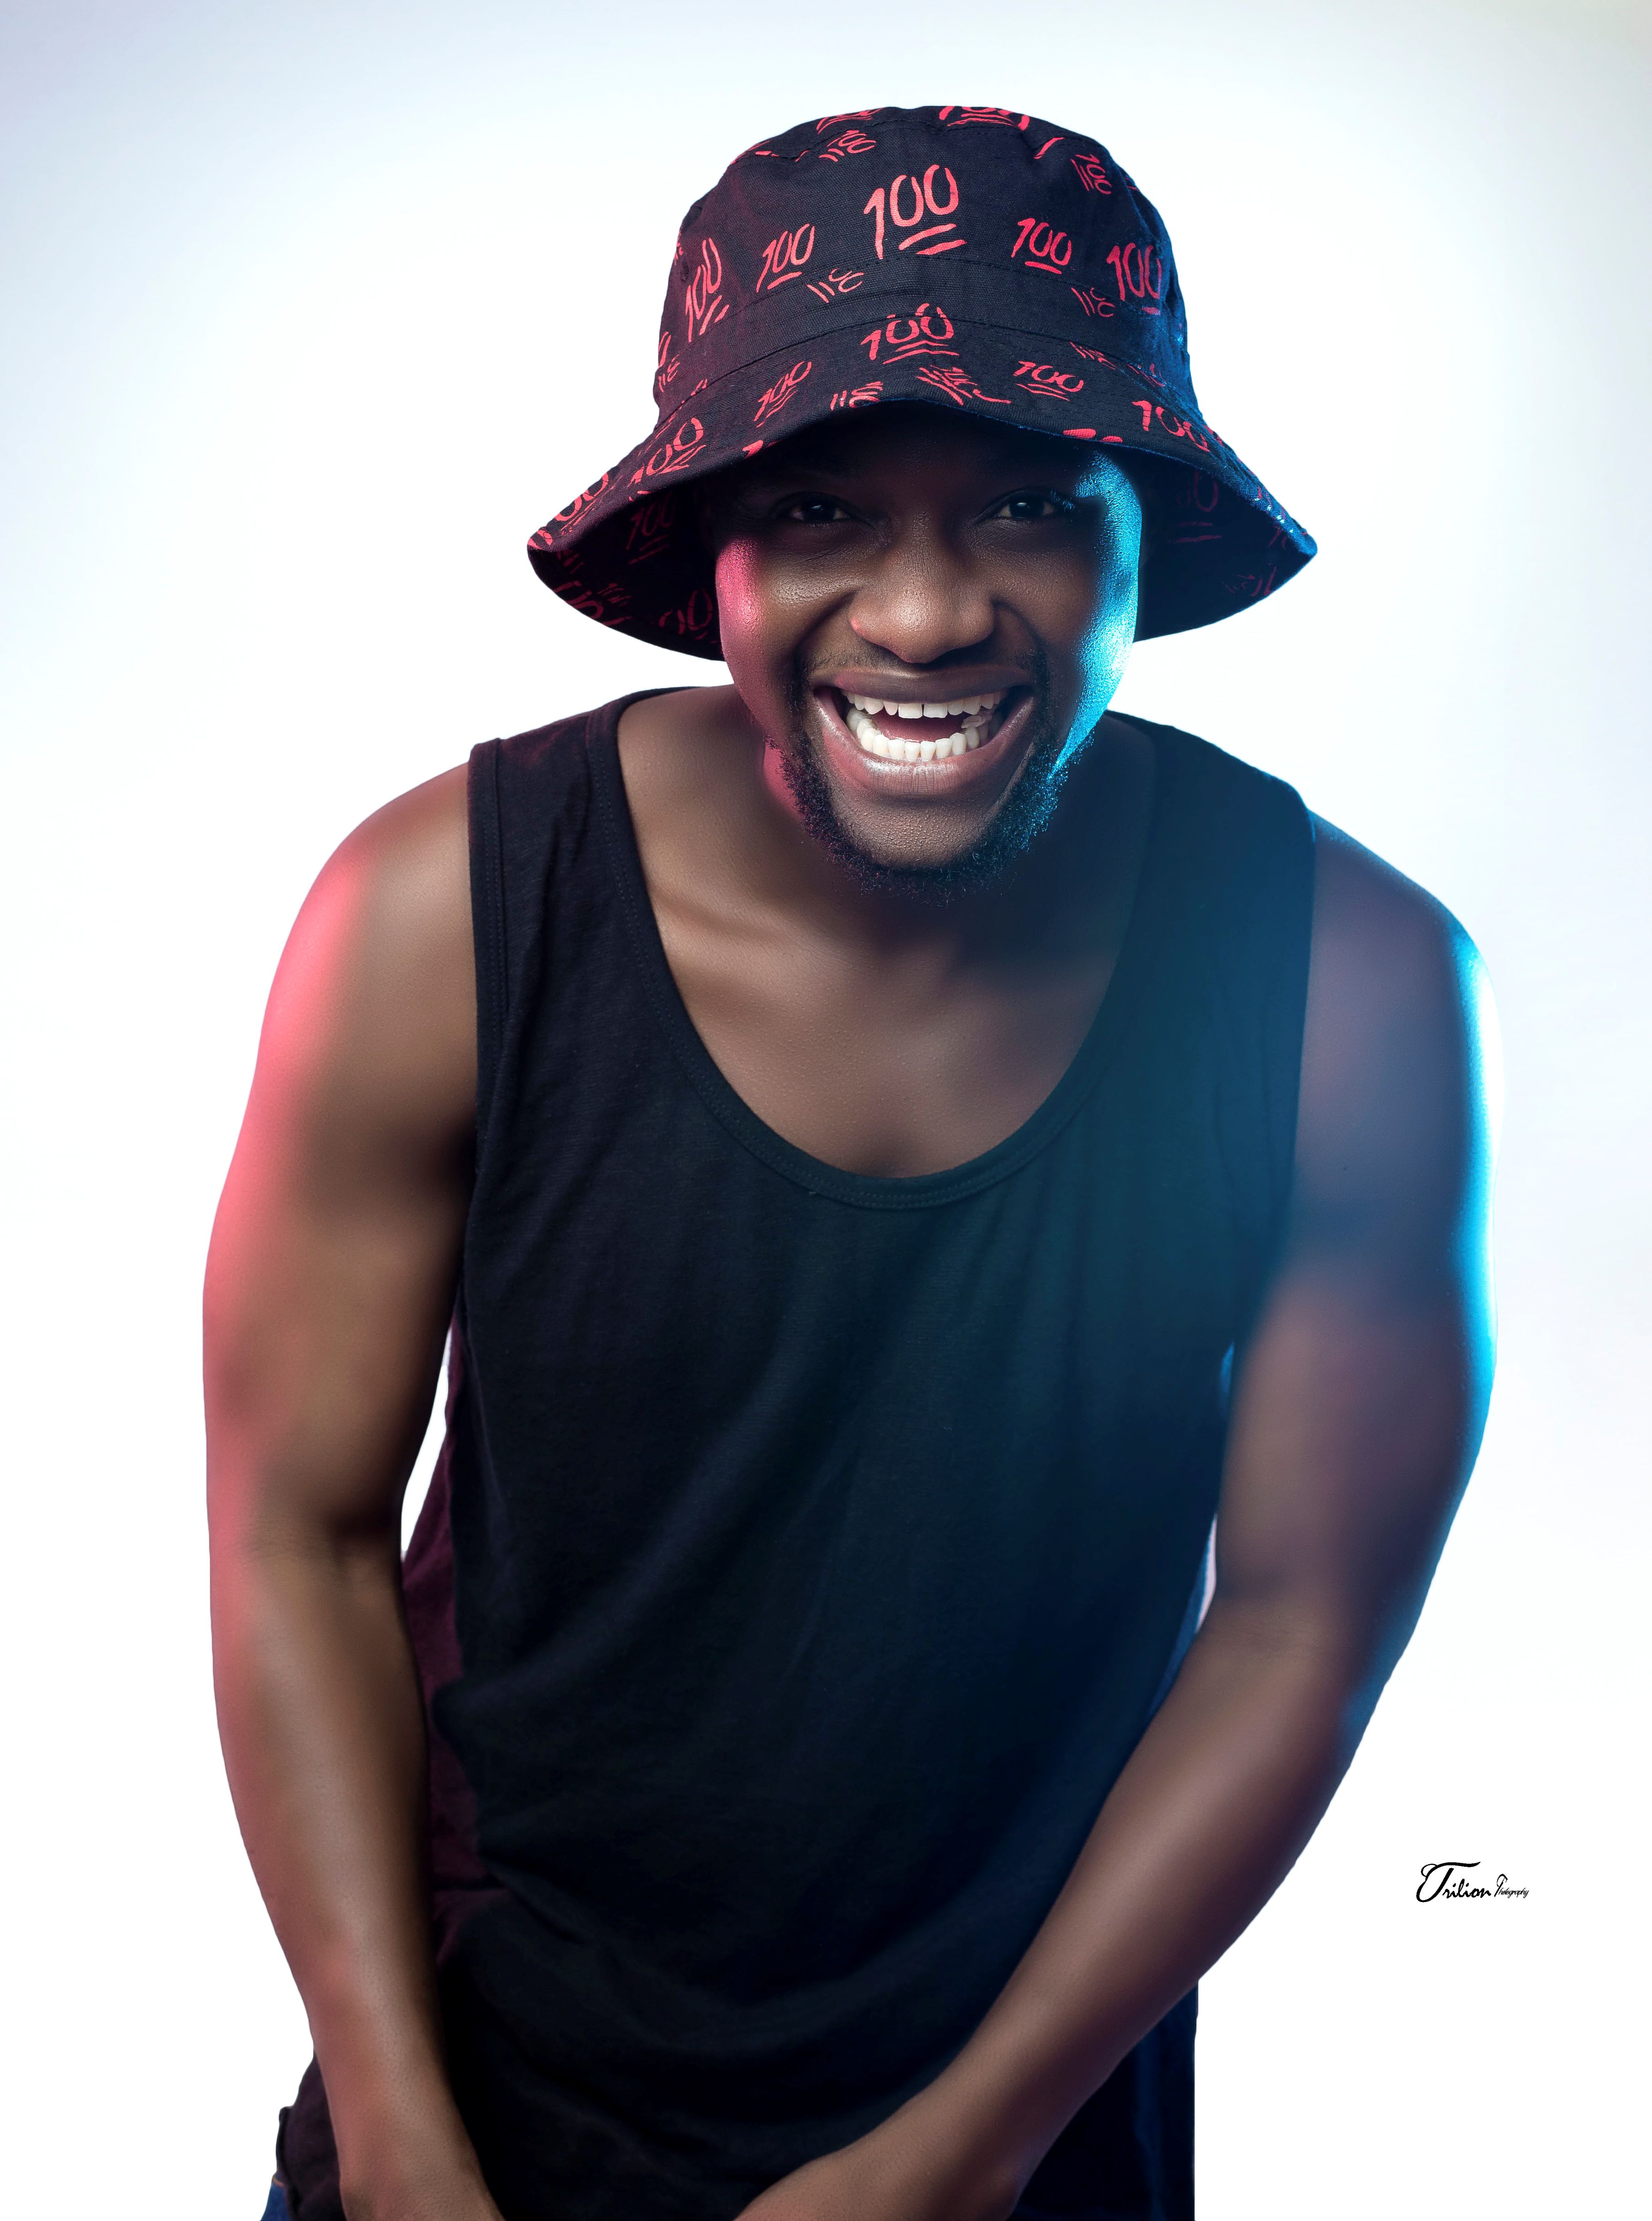 Musician Keeny Ice Releases New Photos